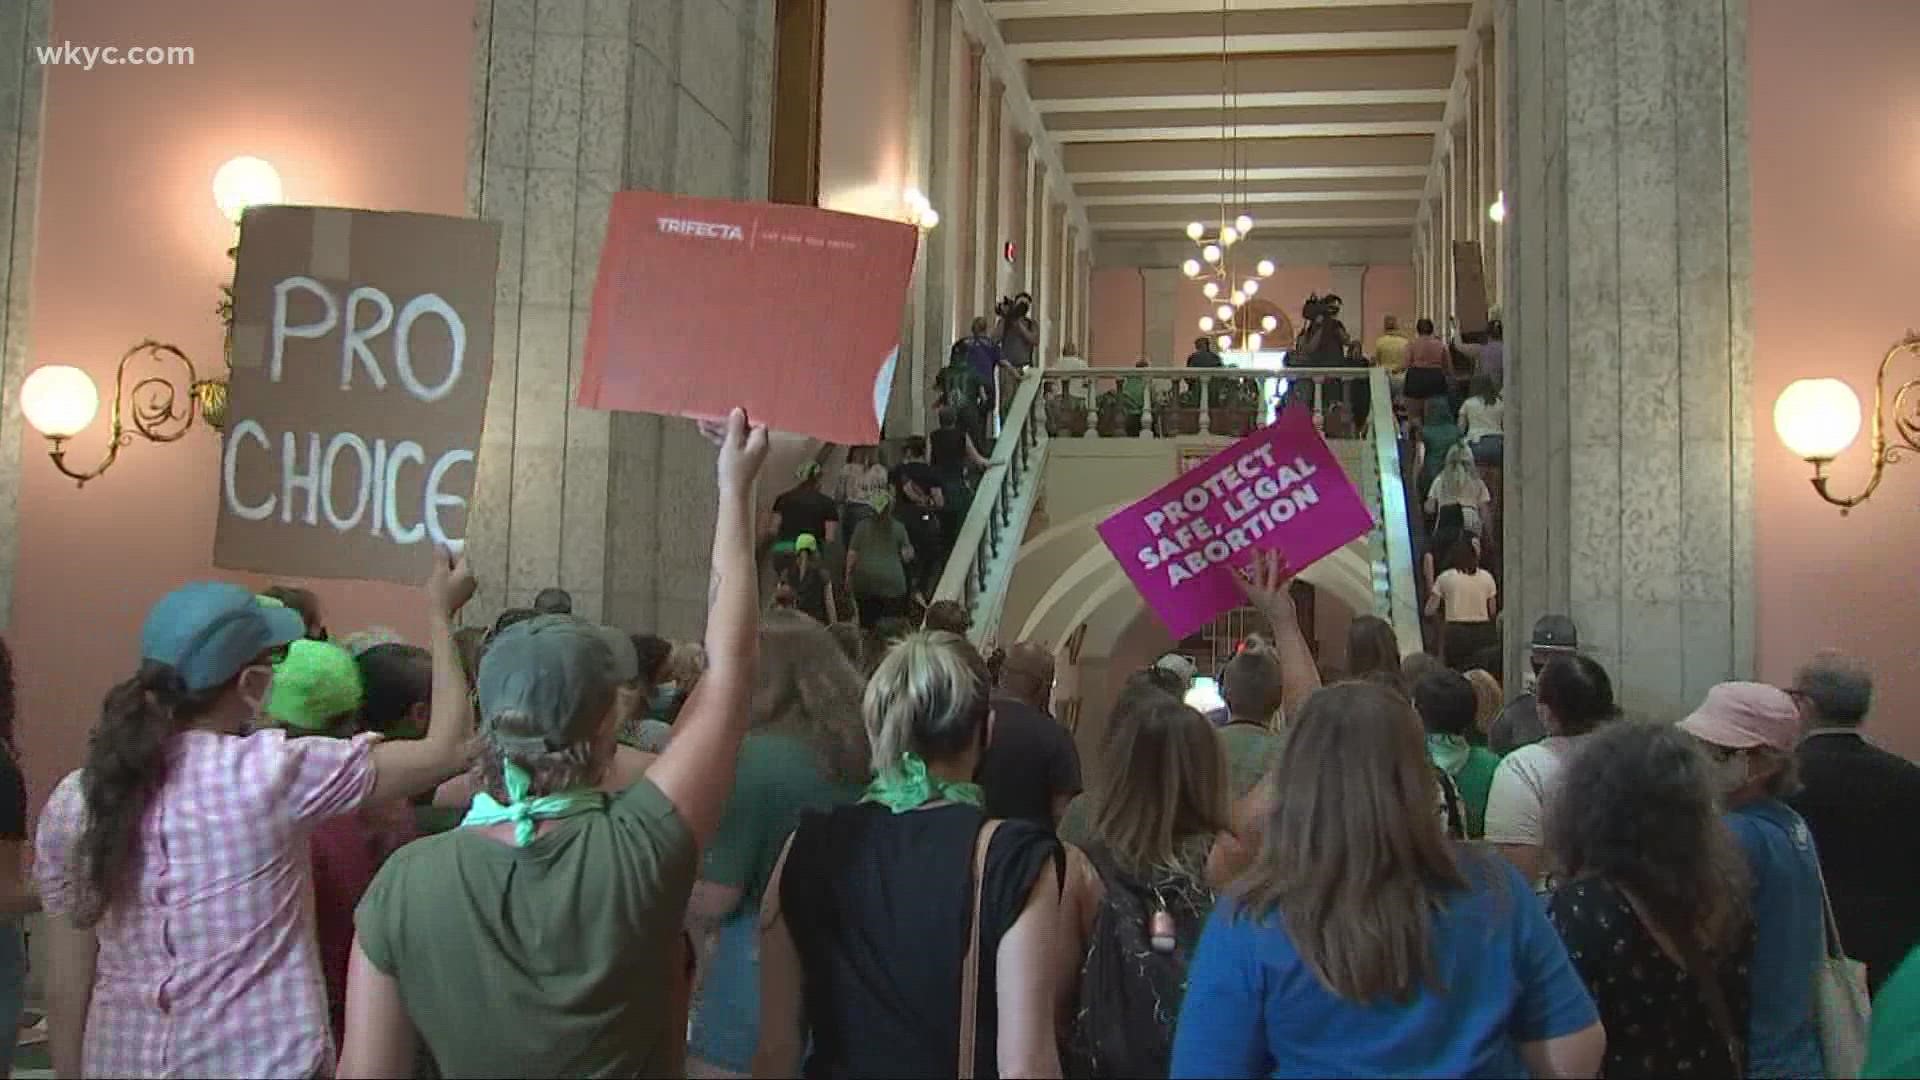 The protesters chanted and carried signs, first outside the Statehouse, then in the Rotunda, then in the Senate.